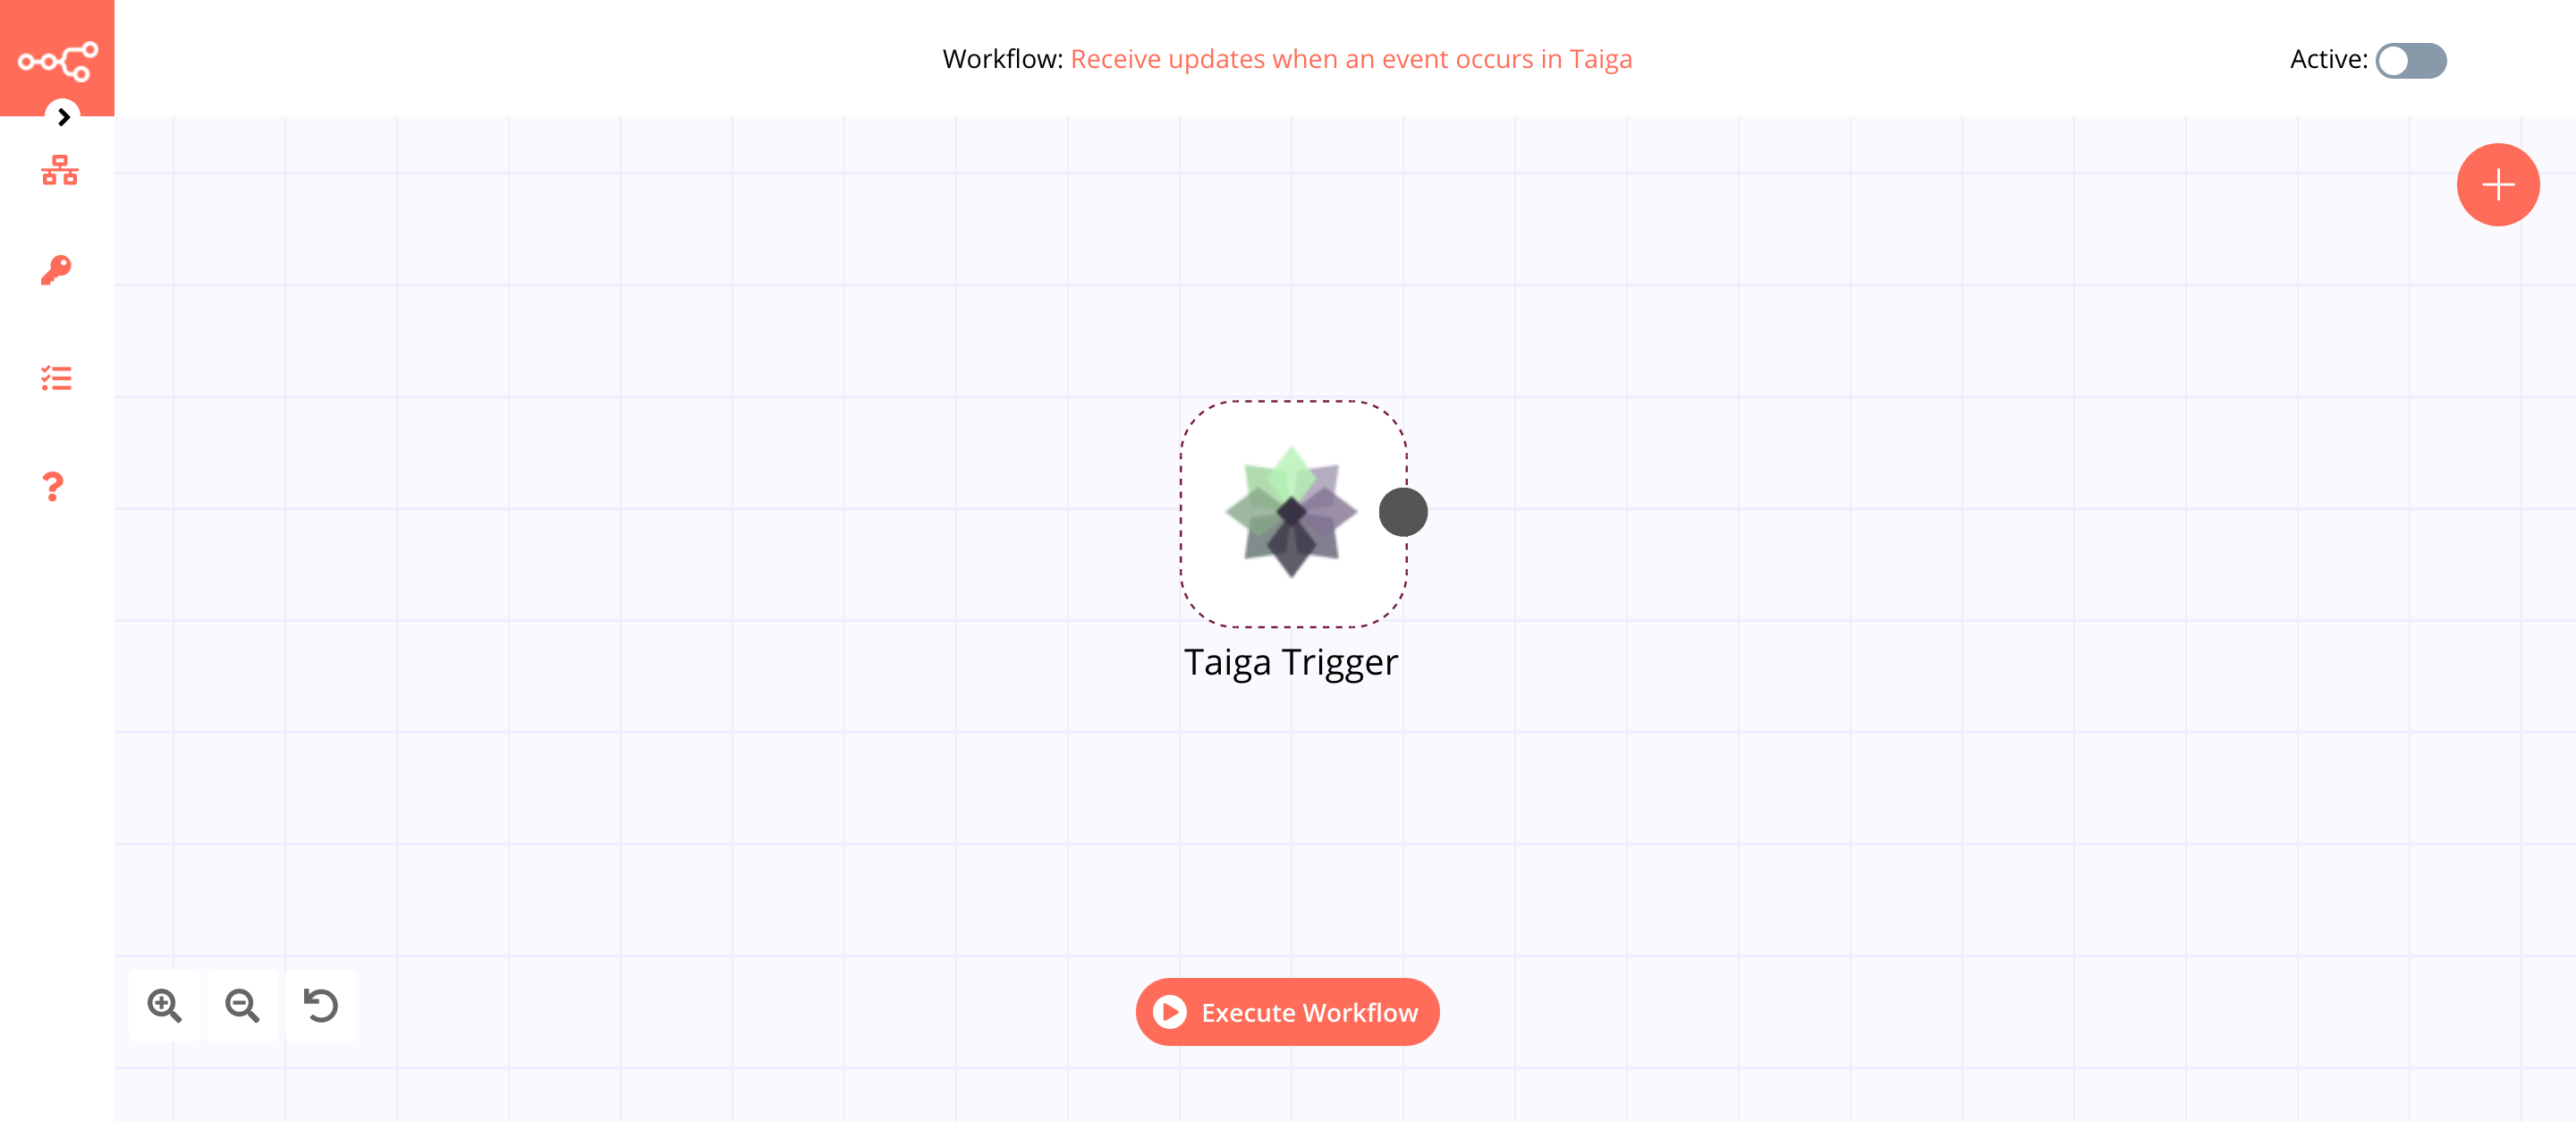 A workflow with the Taiga Trigger node